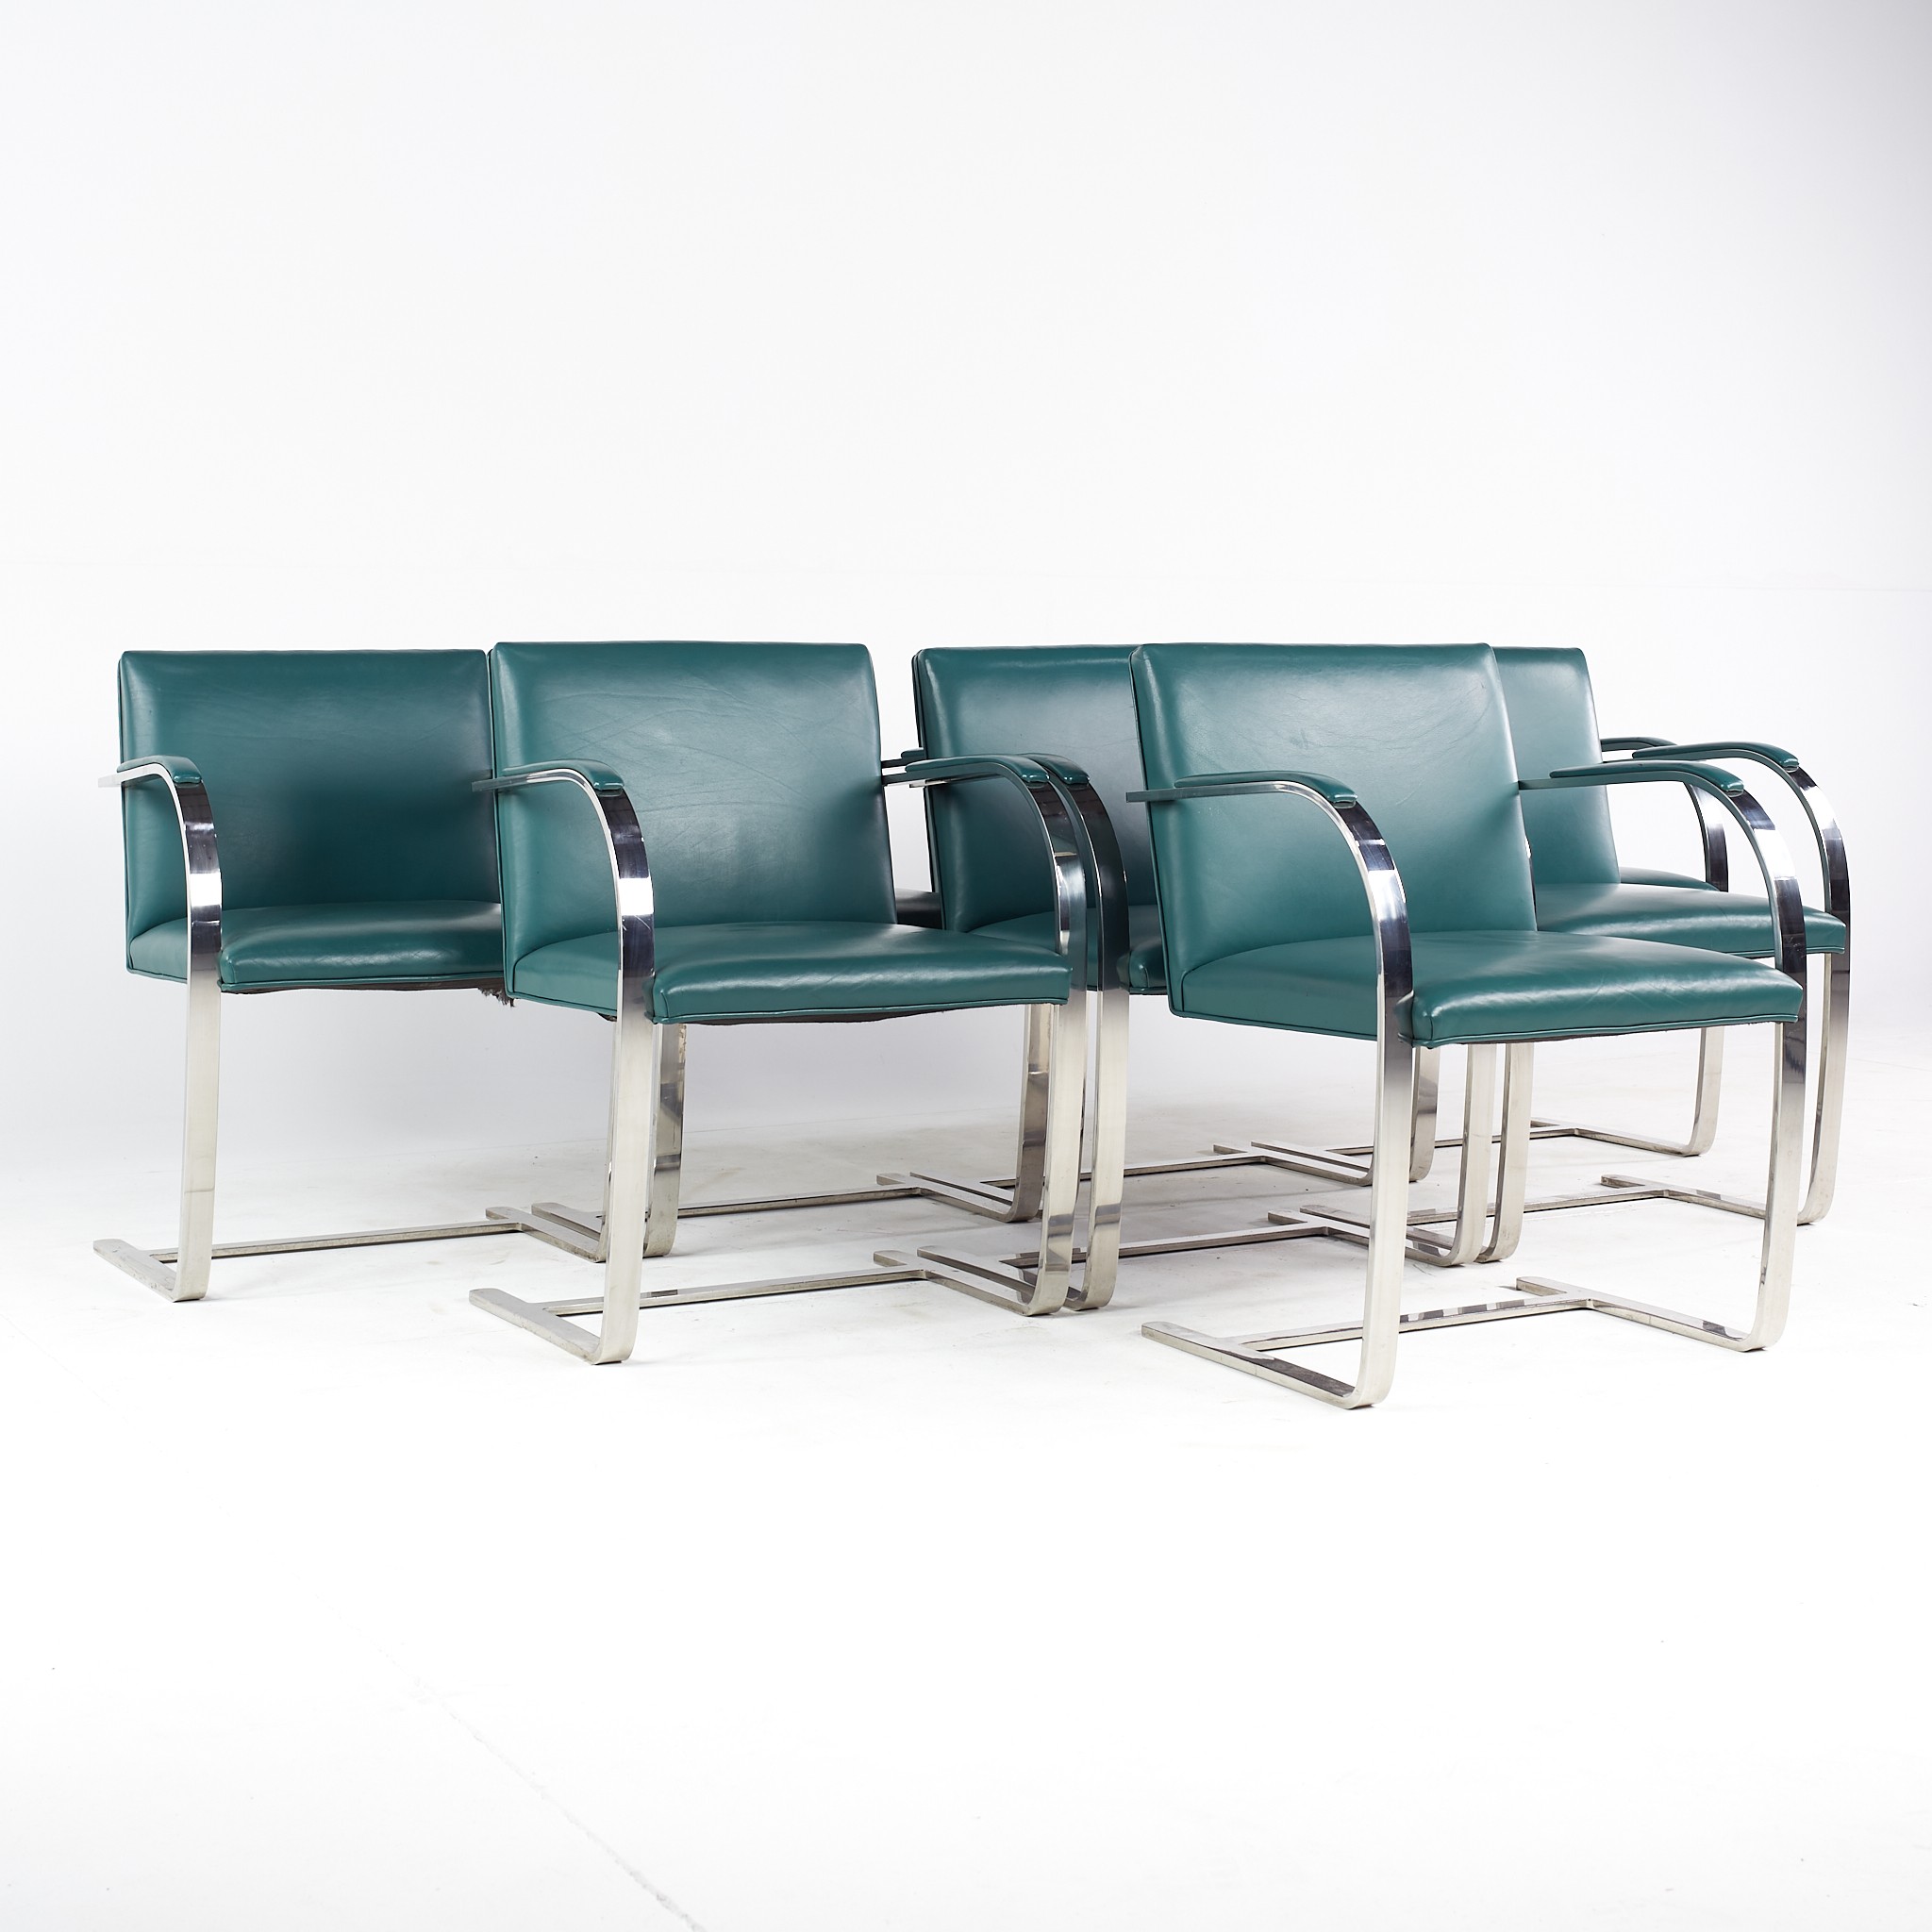 Brno Mid Century Flat Bar Leather Chairs - Set of 8